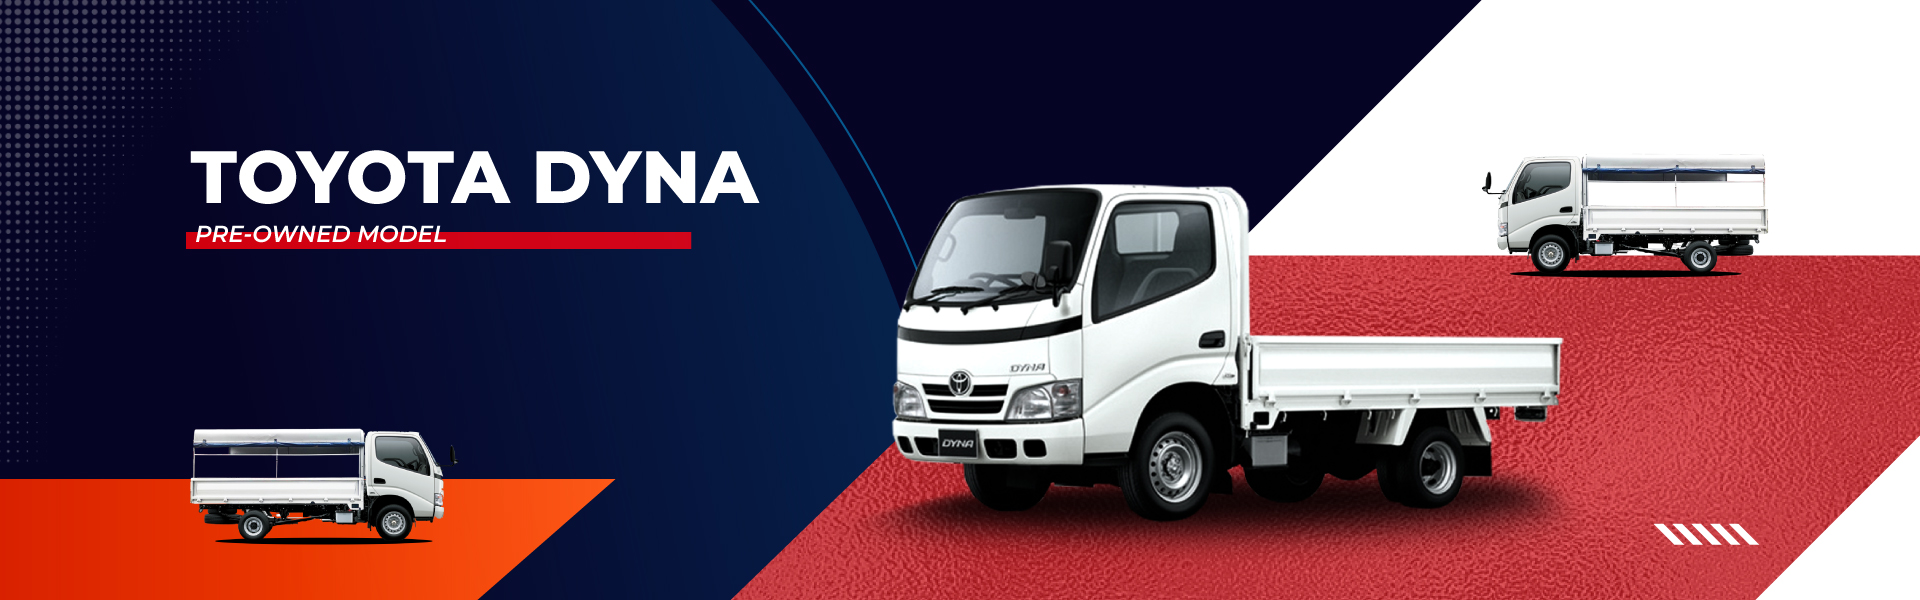 Pre-owned_Toyota Dyna